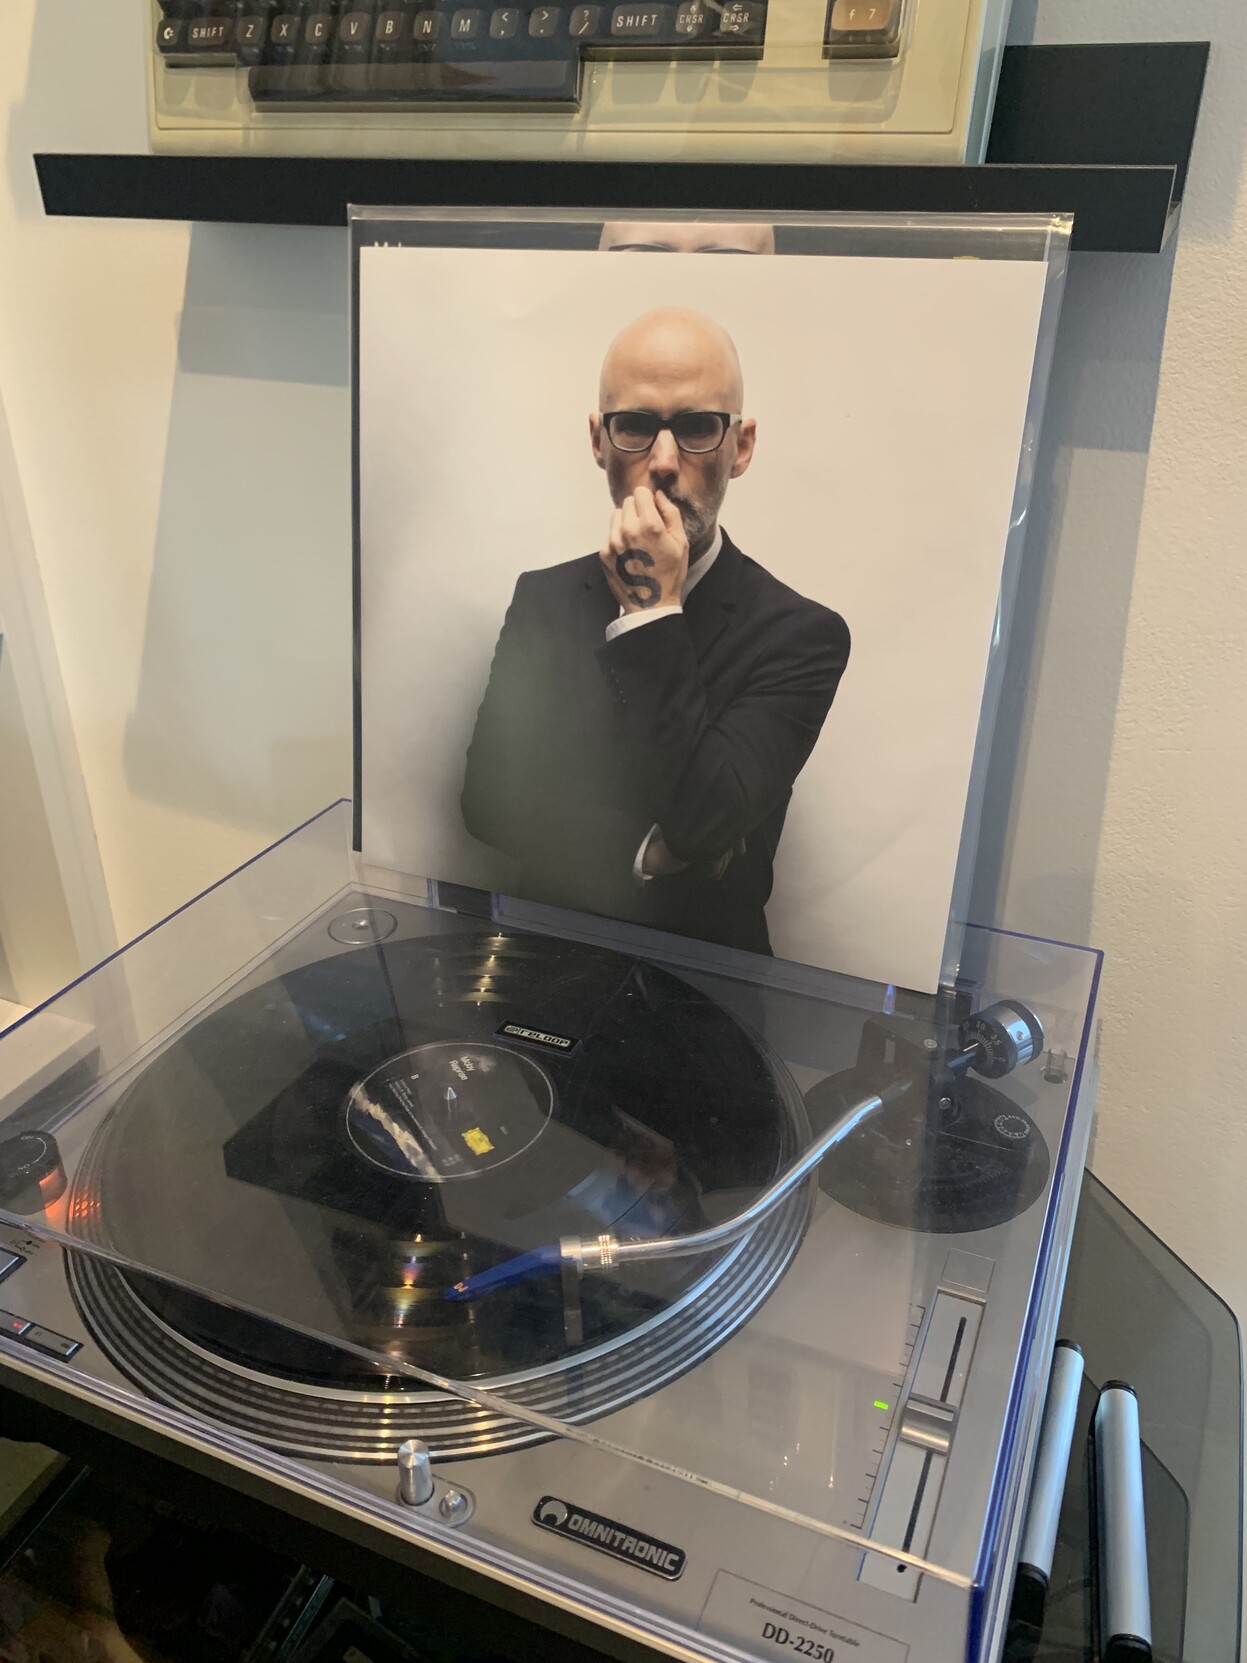 Moby's Reprise album on my record player 